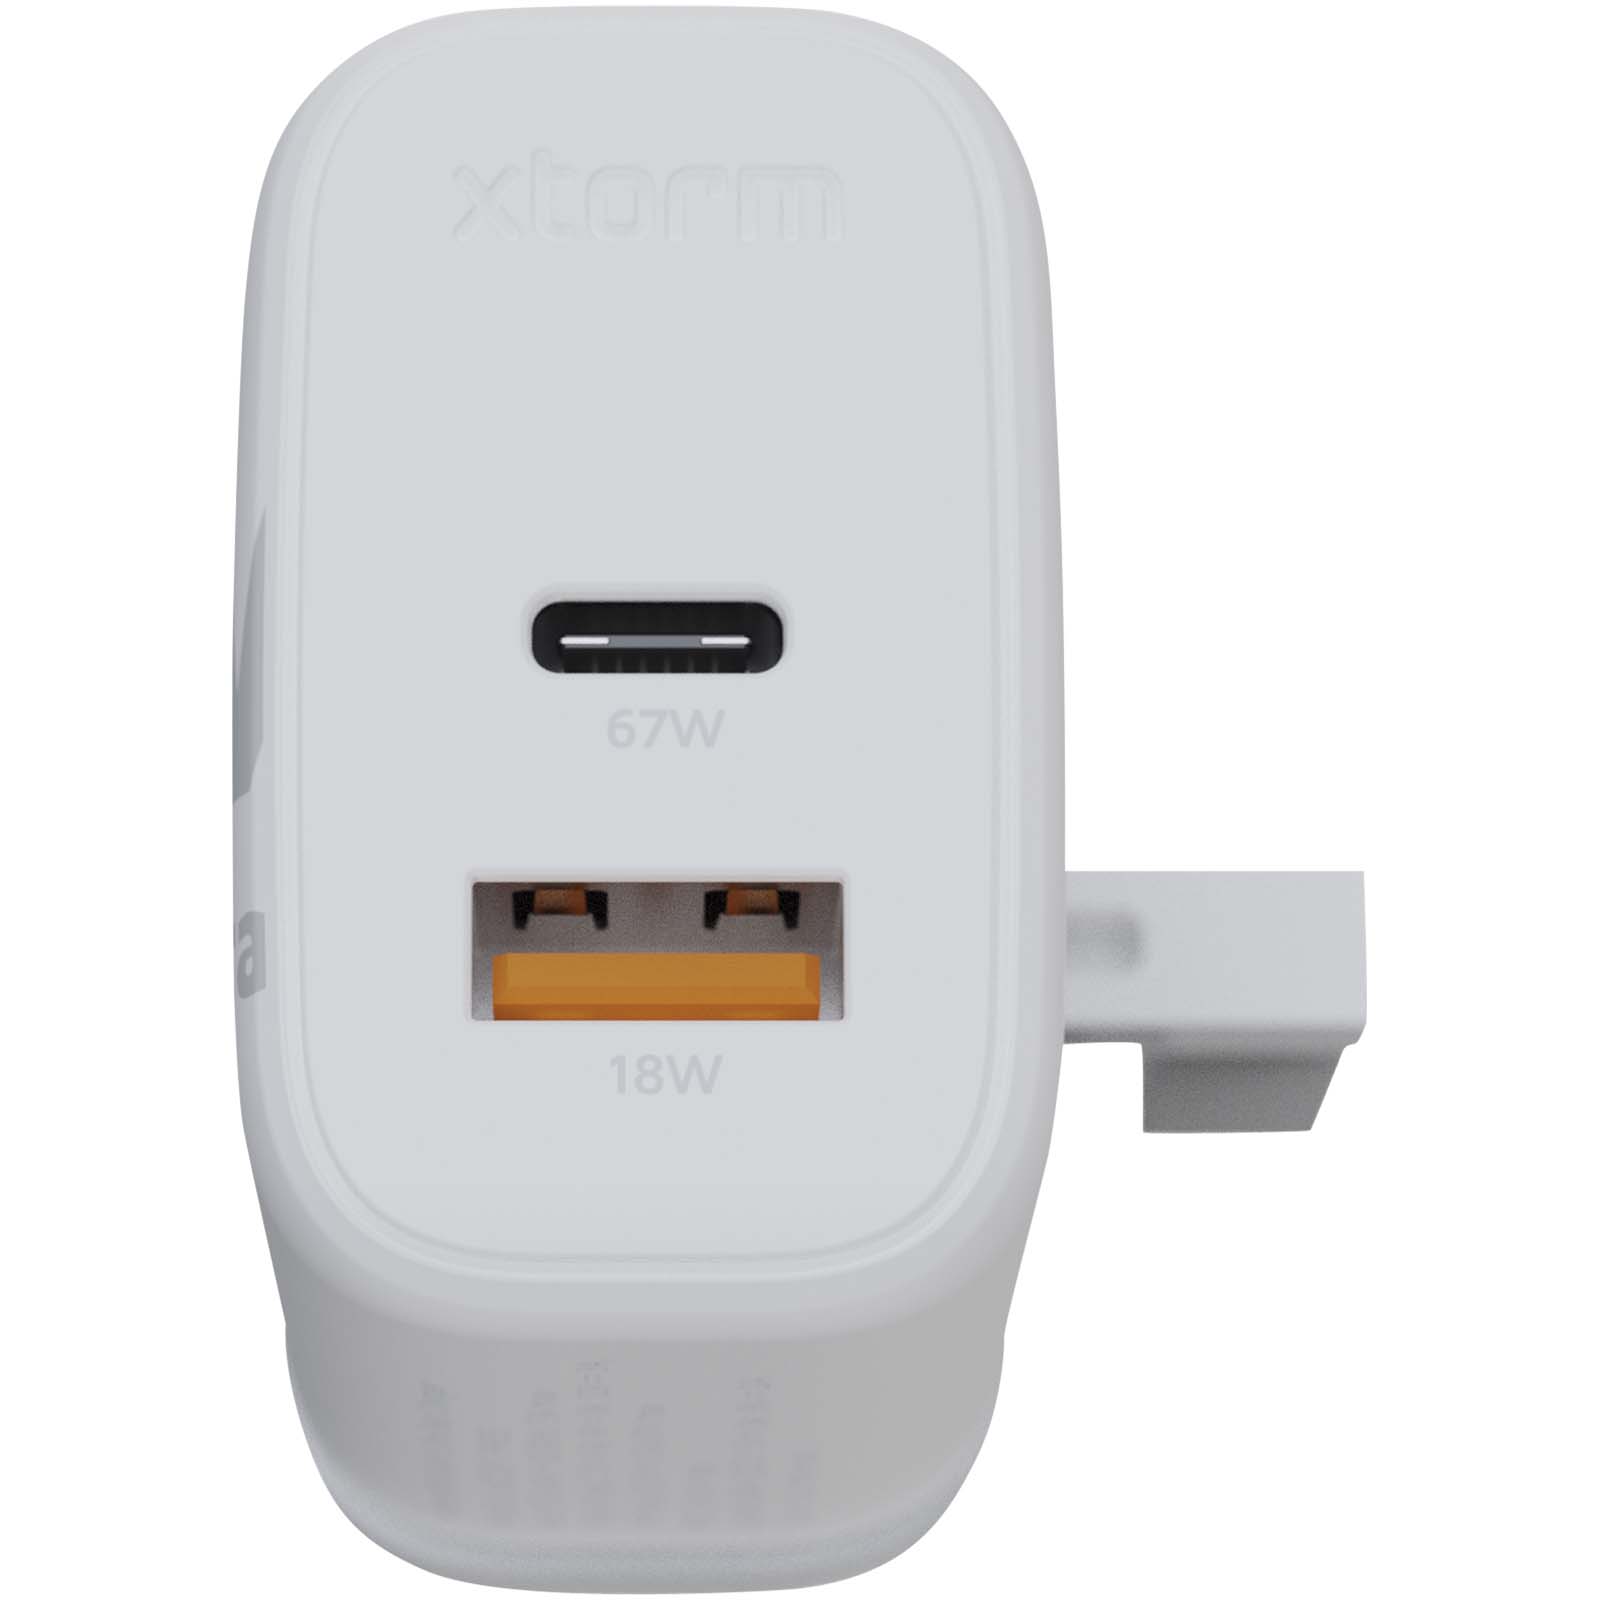 Advertising Chargers - Xtorm XEC067G GaN² Ultra 67W wall charger - UK plug - 2